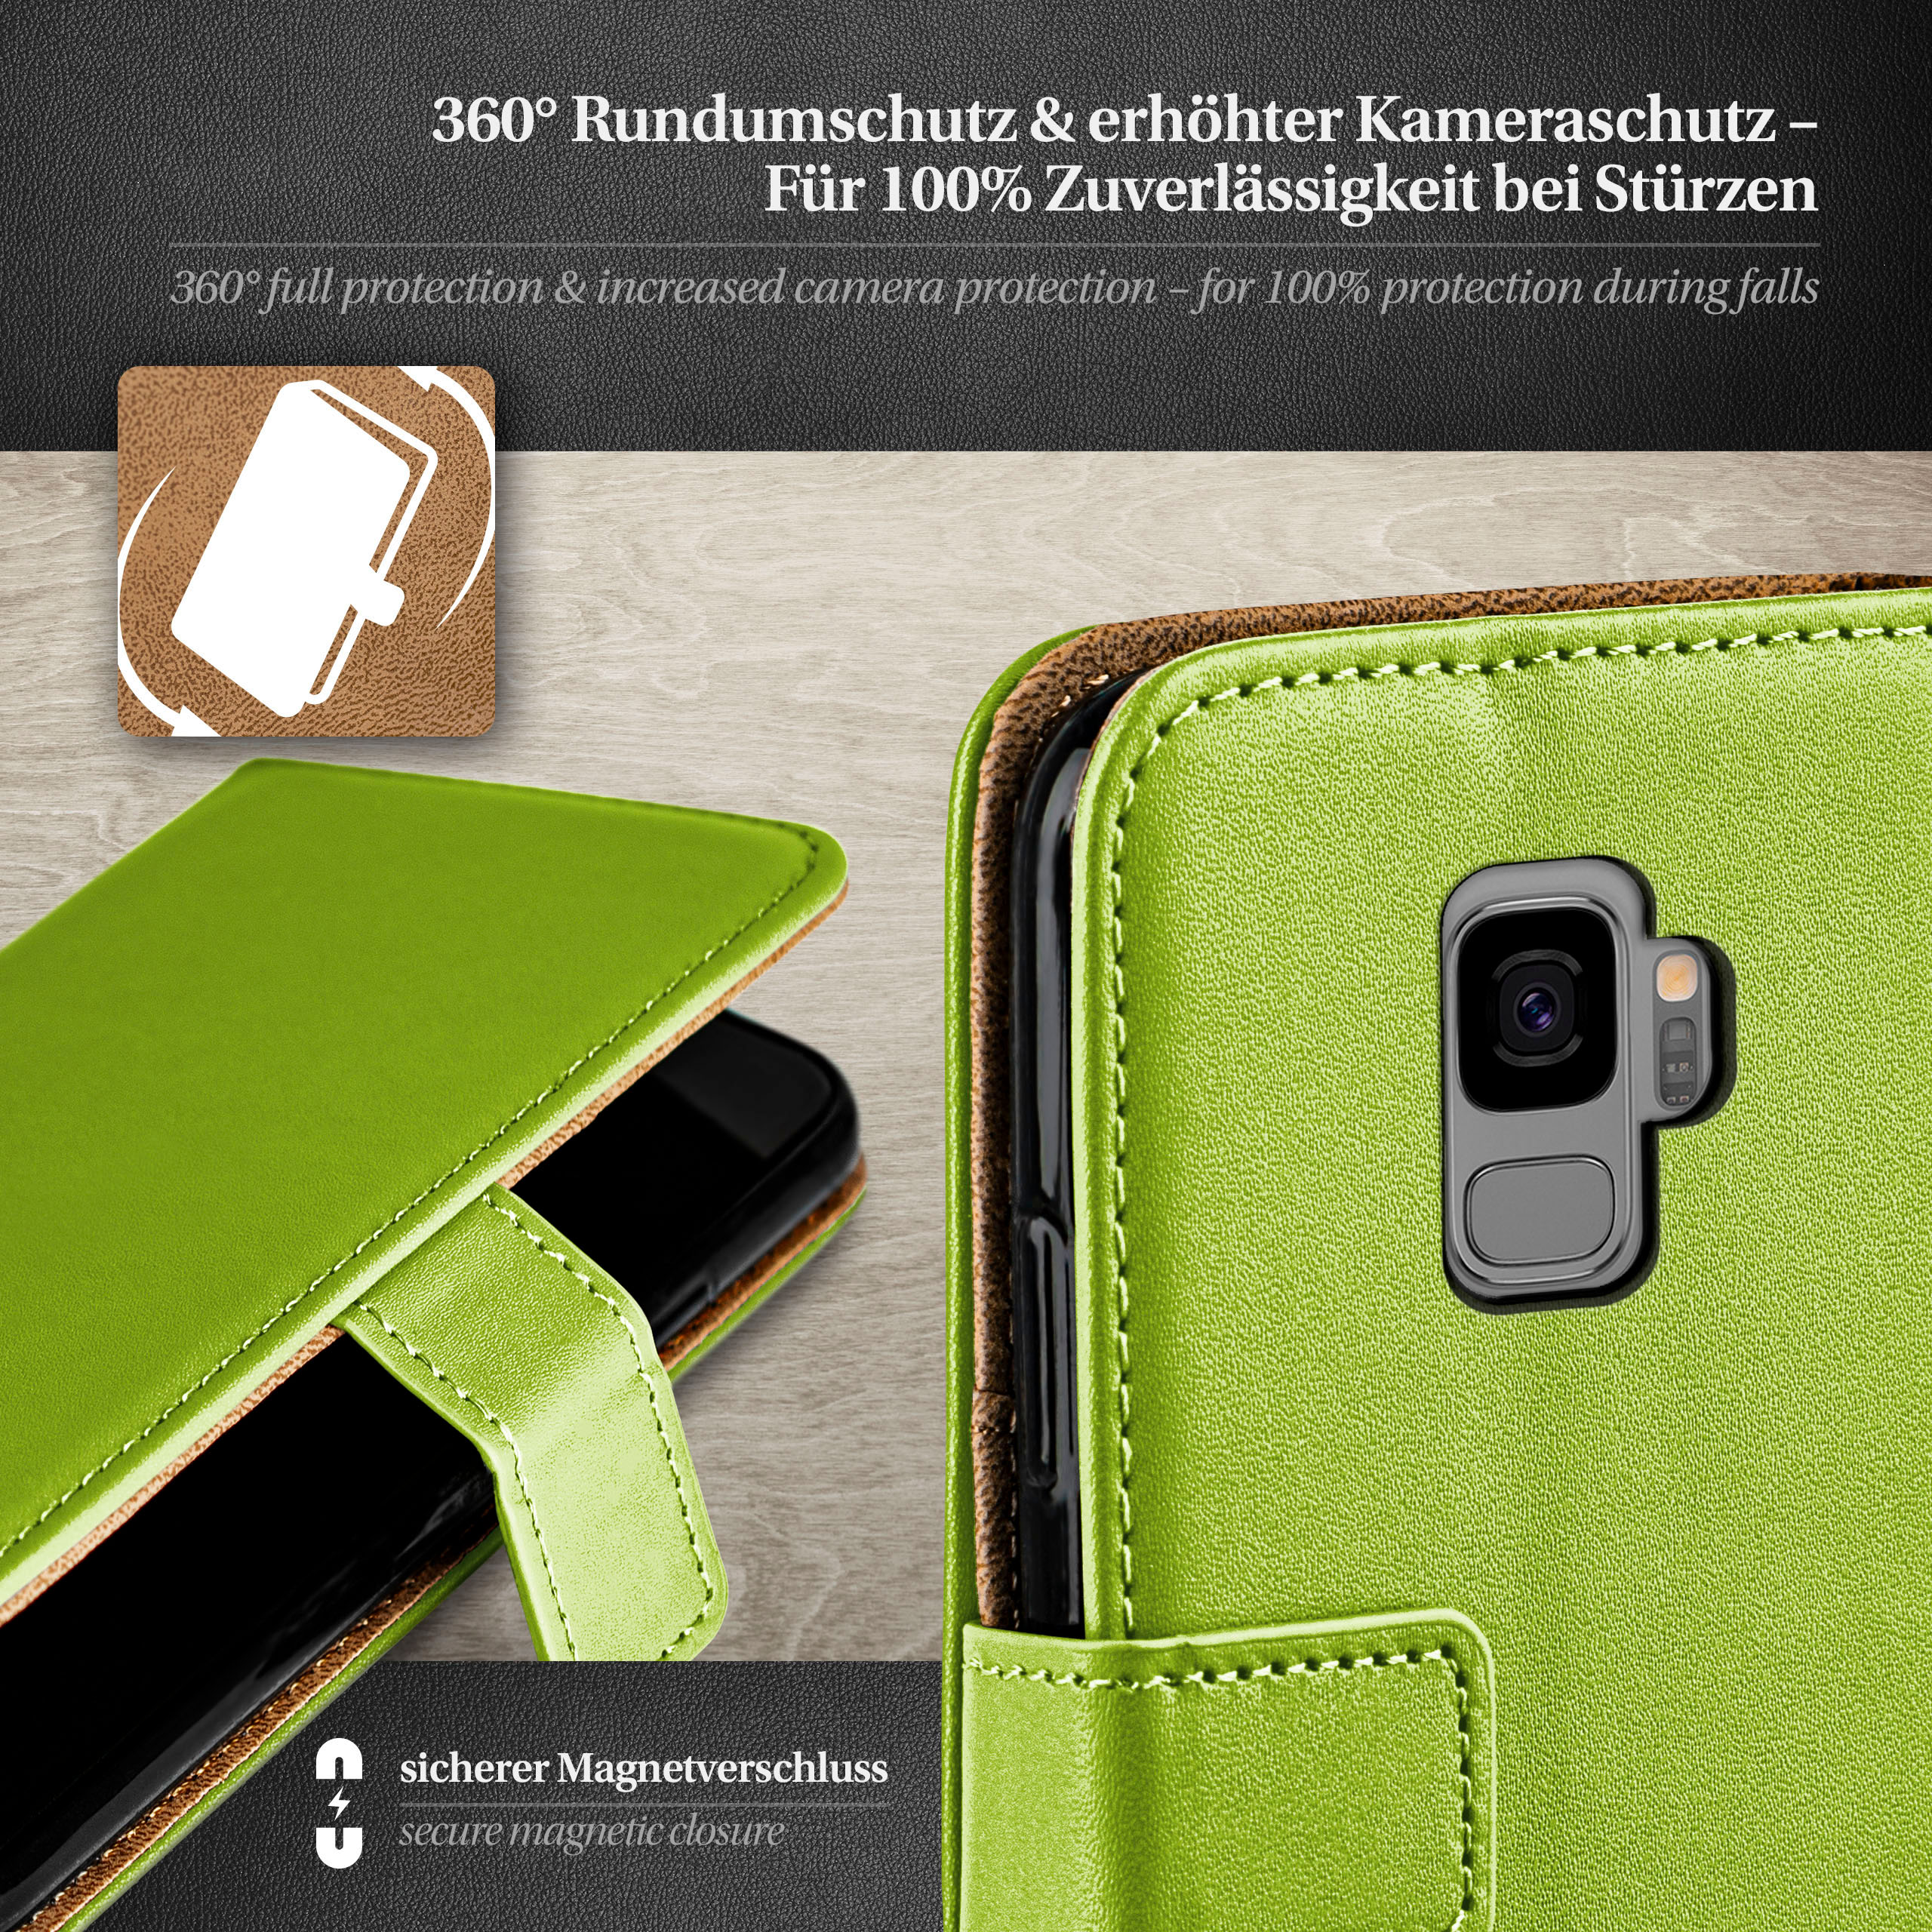 MOEX Book Case, Bookcover, Galaxy S9, Samsung, Lime-Green